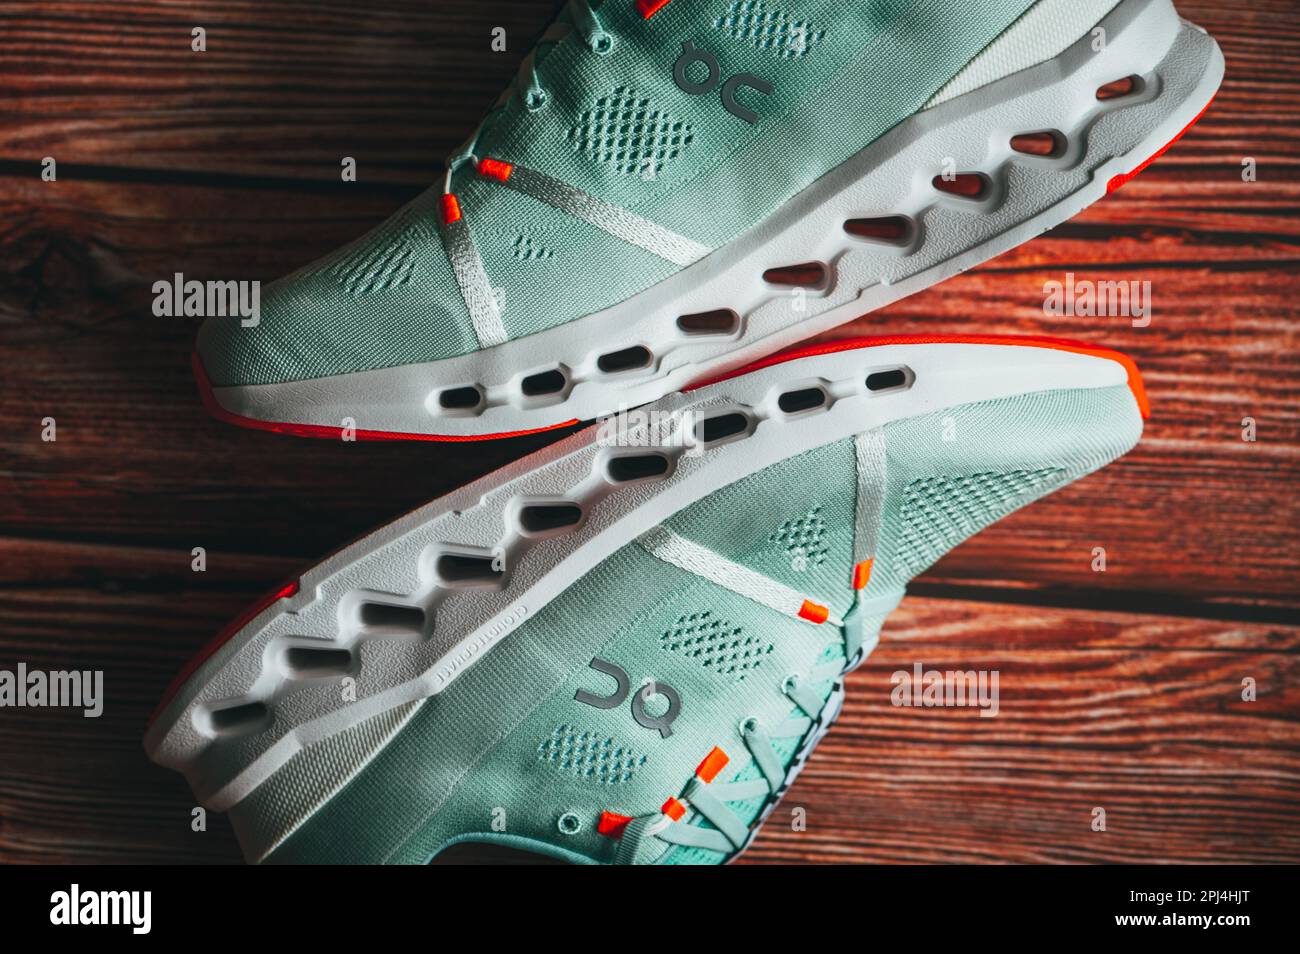 ZURICH, SWITZERLAND, MARCH 31, 2023: Cloudsurfer 7, new innovative Road Running Shoes from On Running Company: Soft, Comfortable, and Ready to Take on Stock Photo